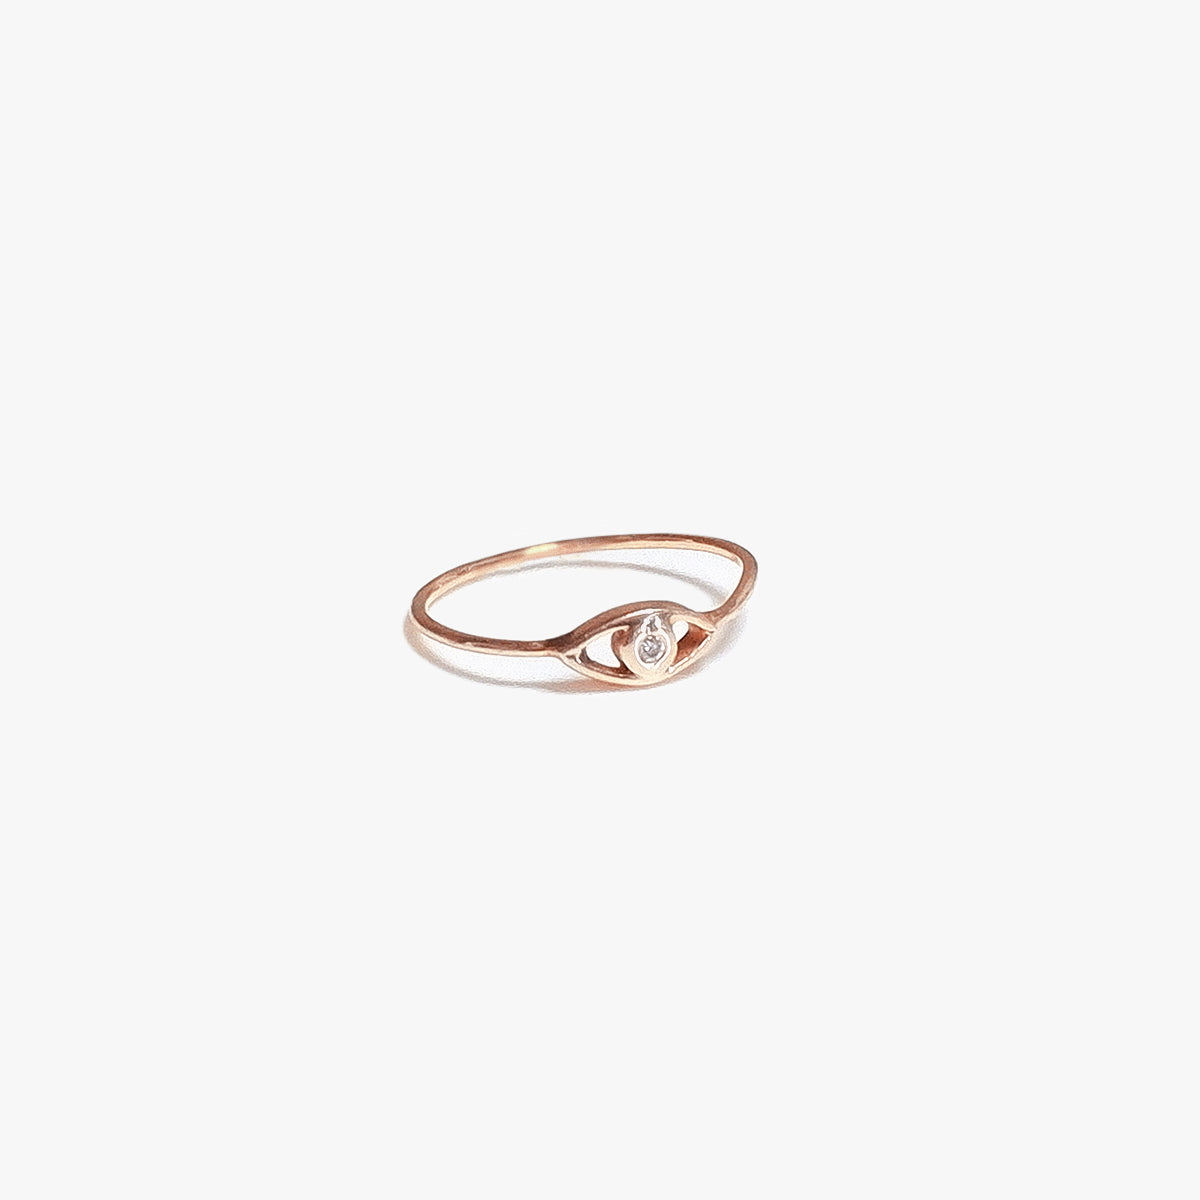 The Evil Eye Diamond Ring in Solid Gold